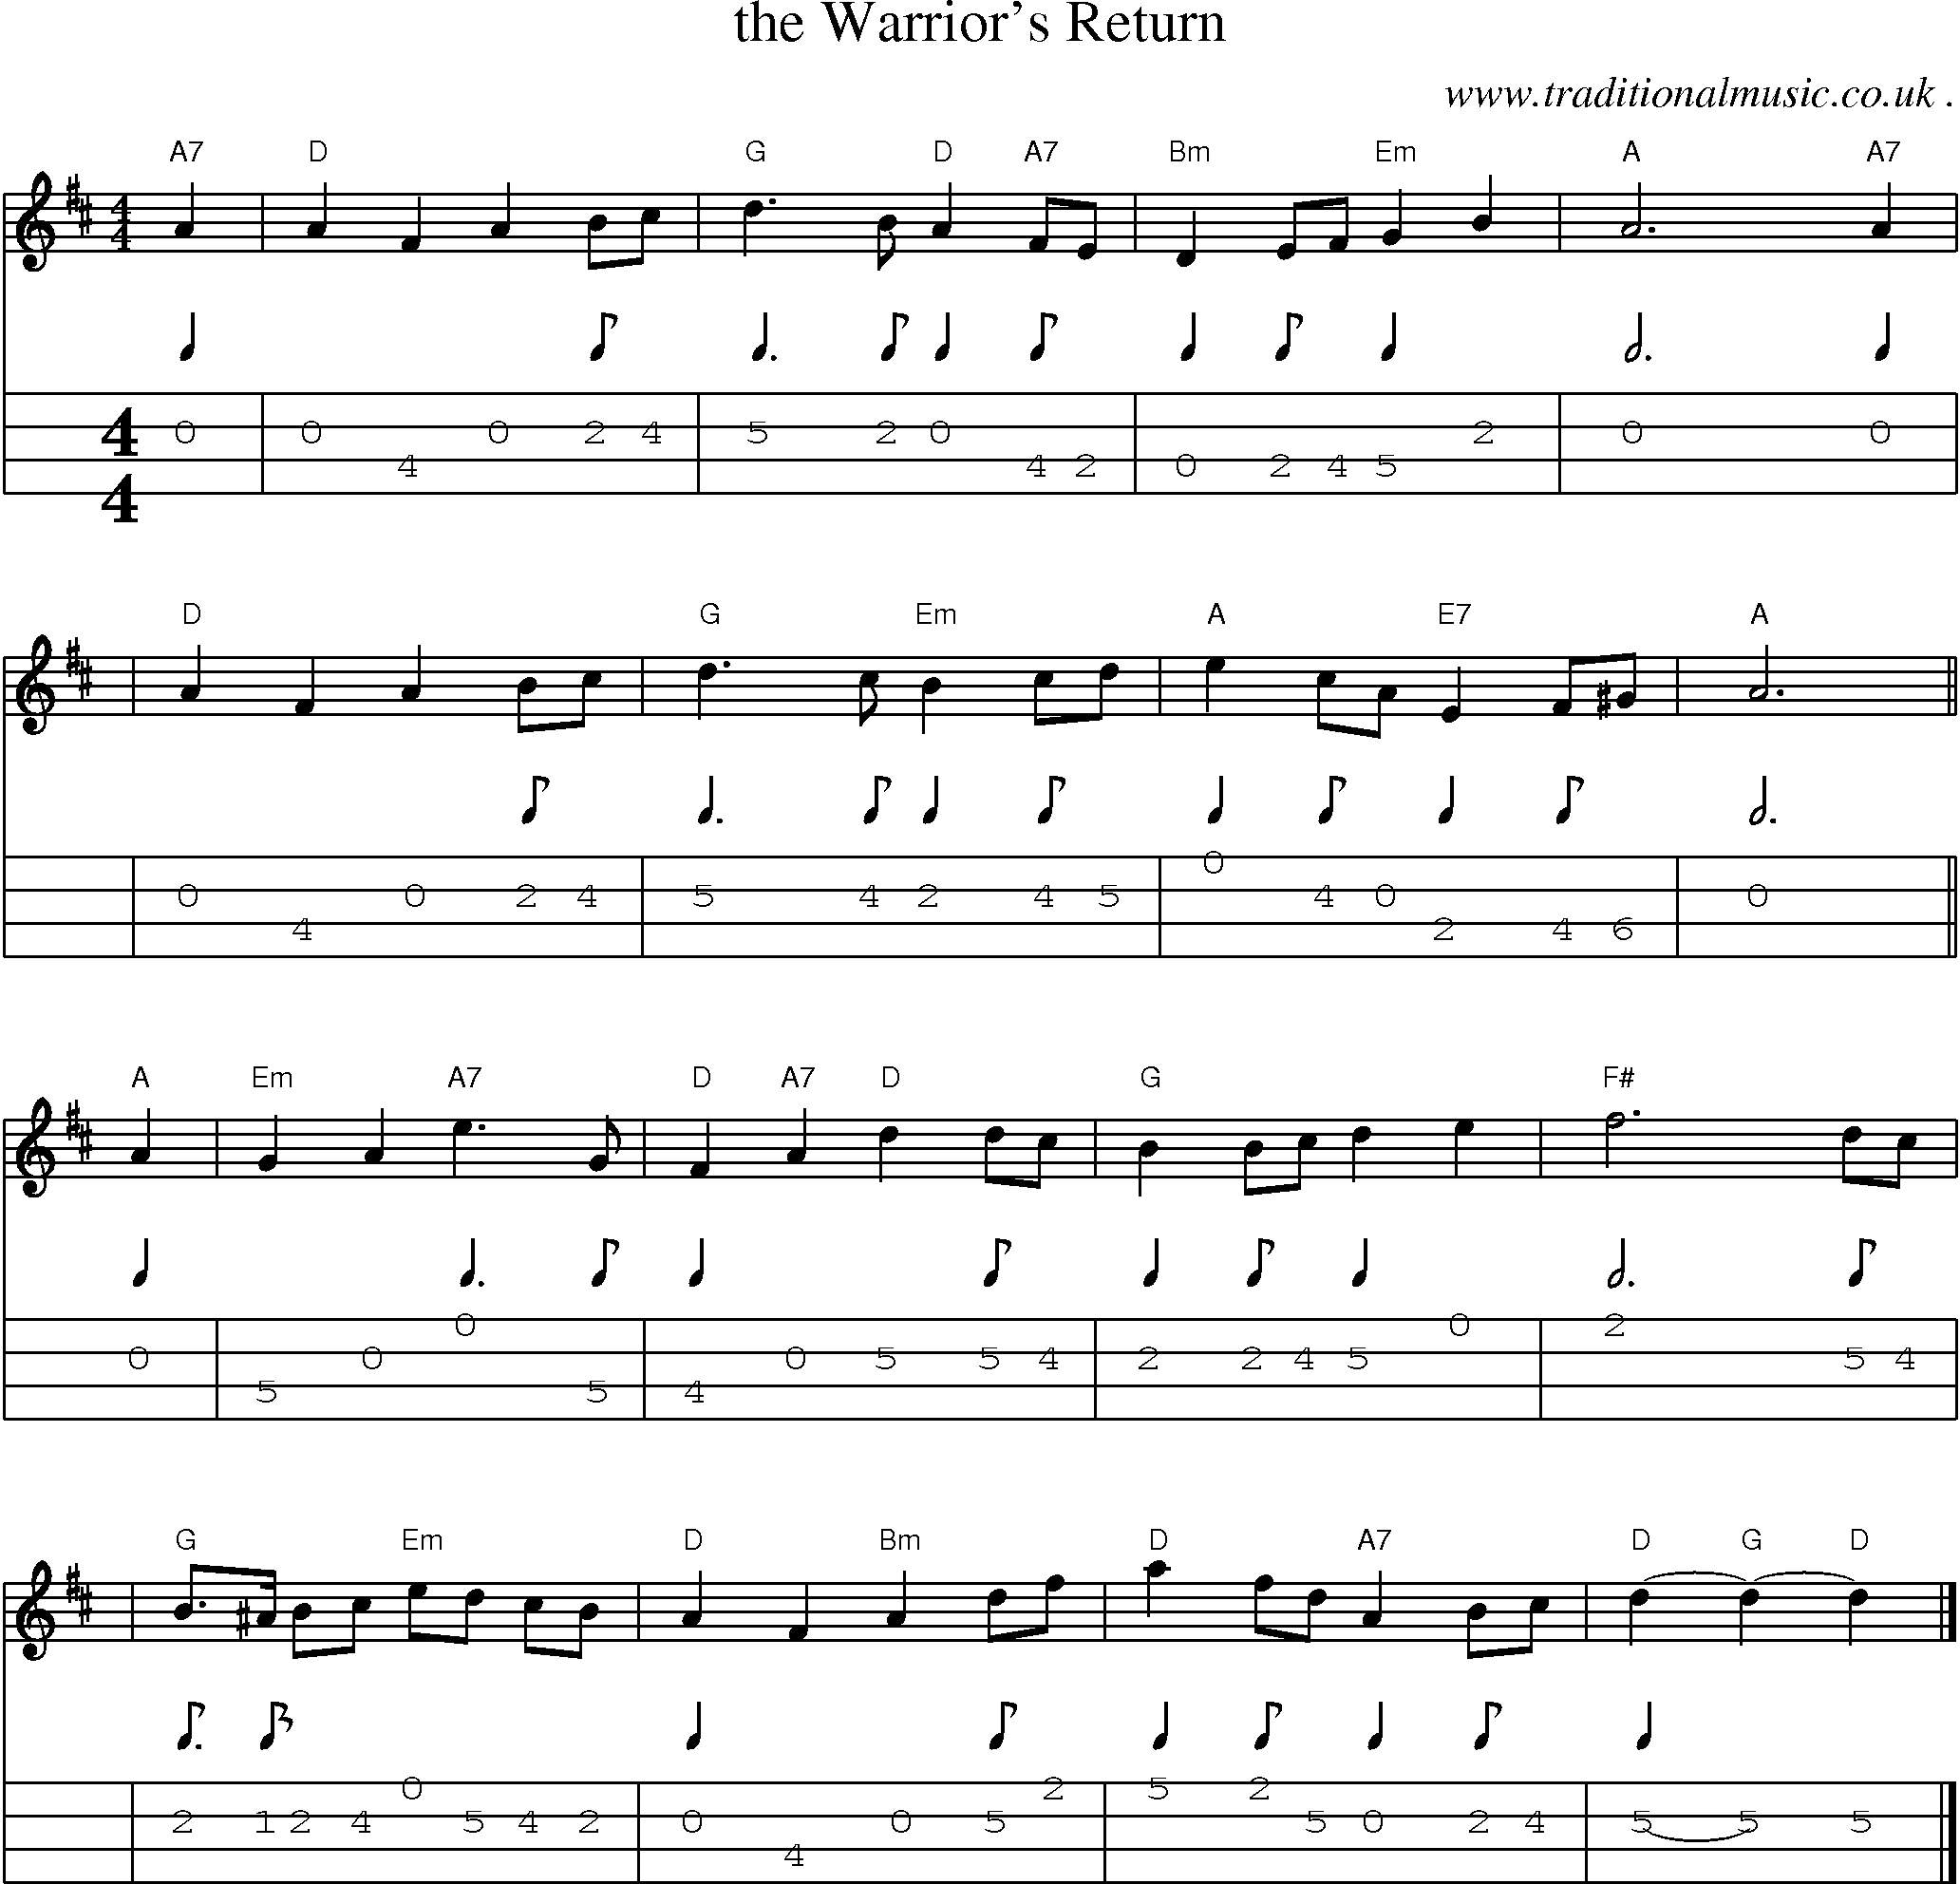 Sheet-music  score, Chords and Mandolin Tabs for The Warriors Return